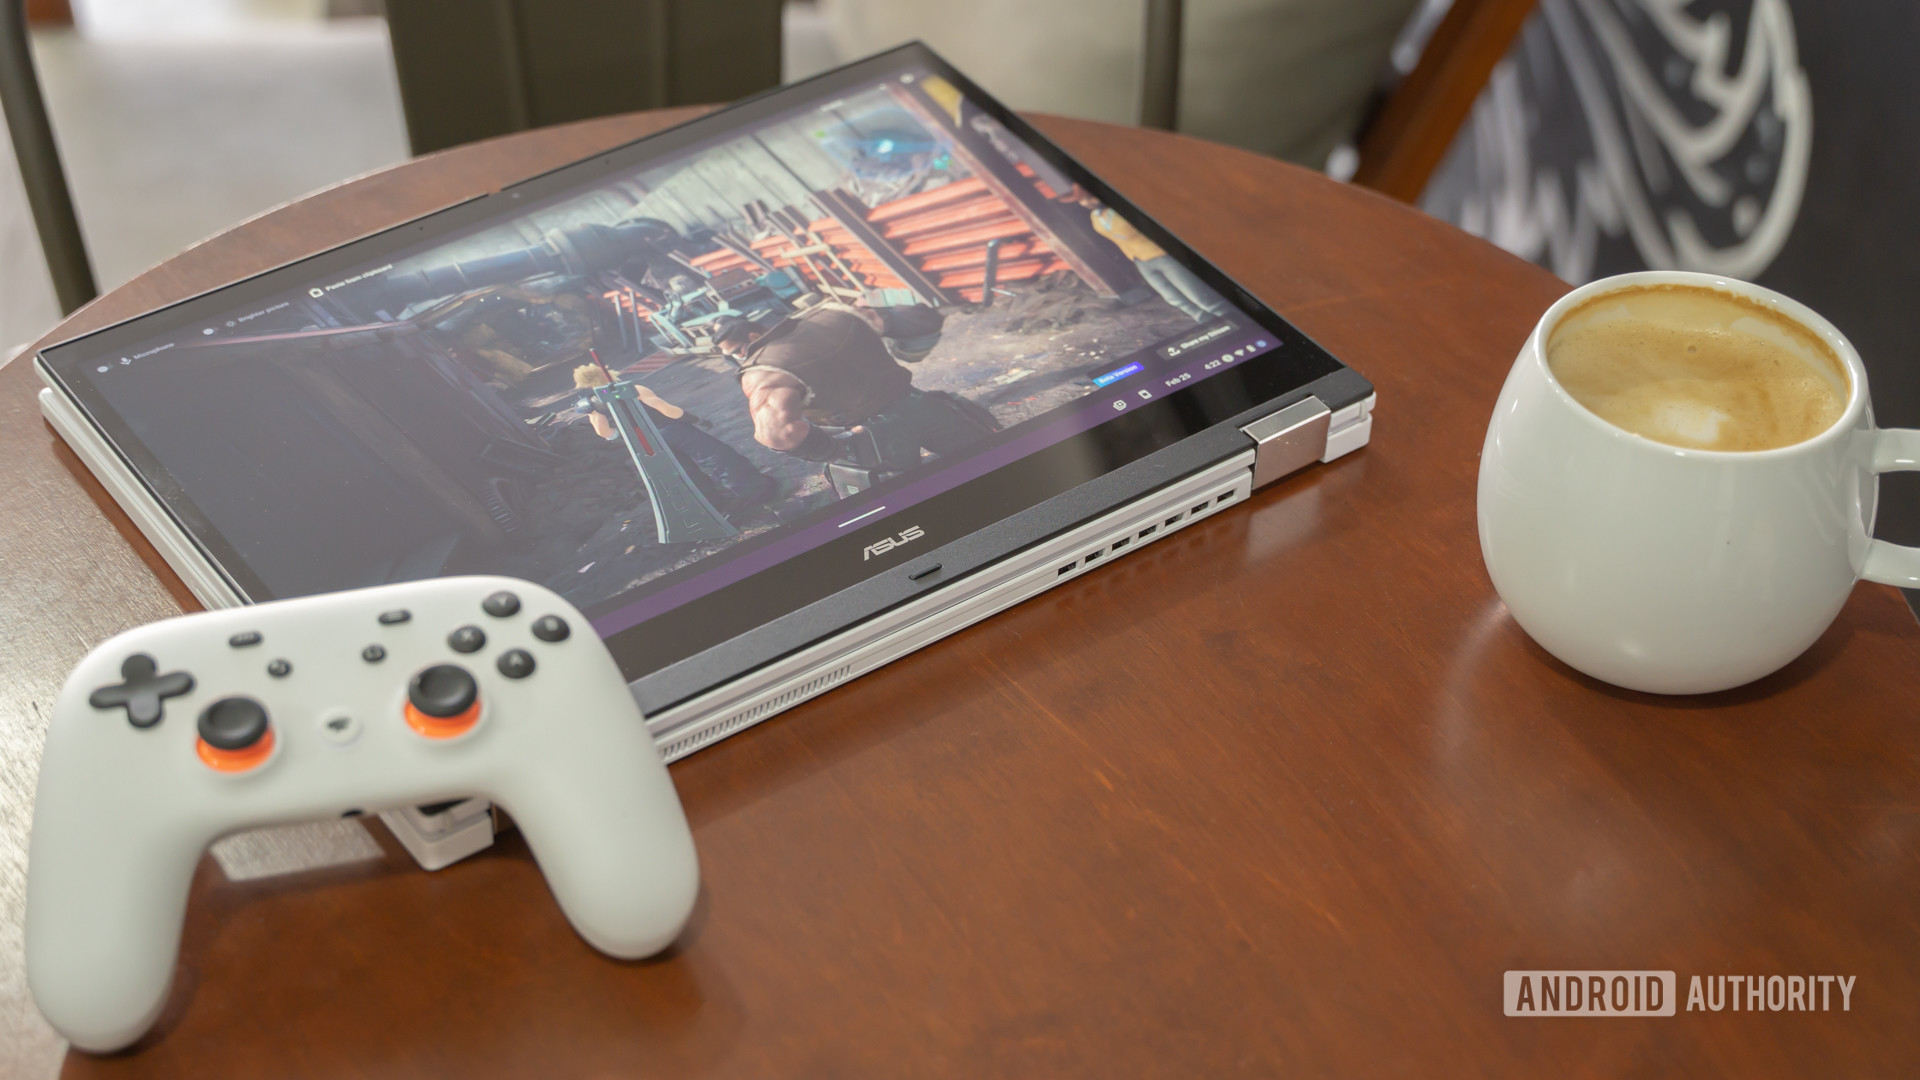 ASUS Chromebook Vibe CX34 Flip in tablet mode next to controller and coffee